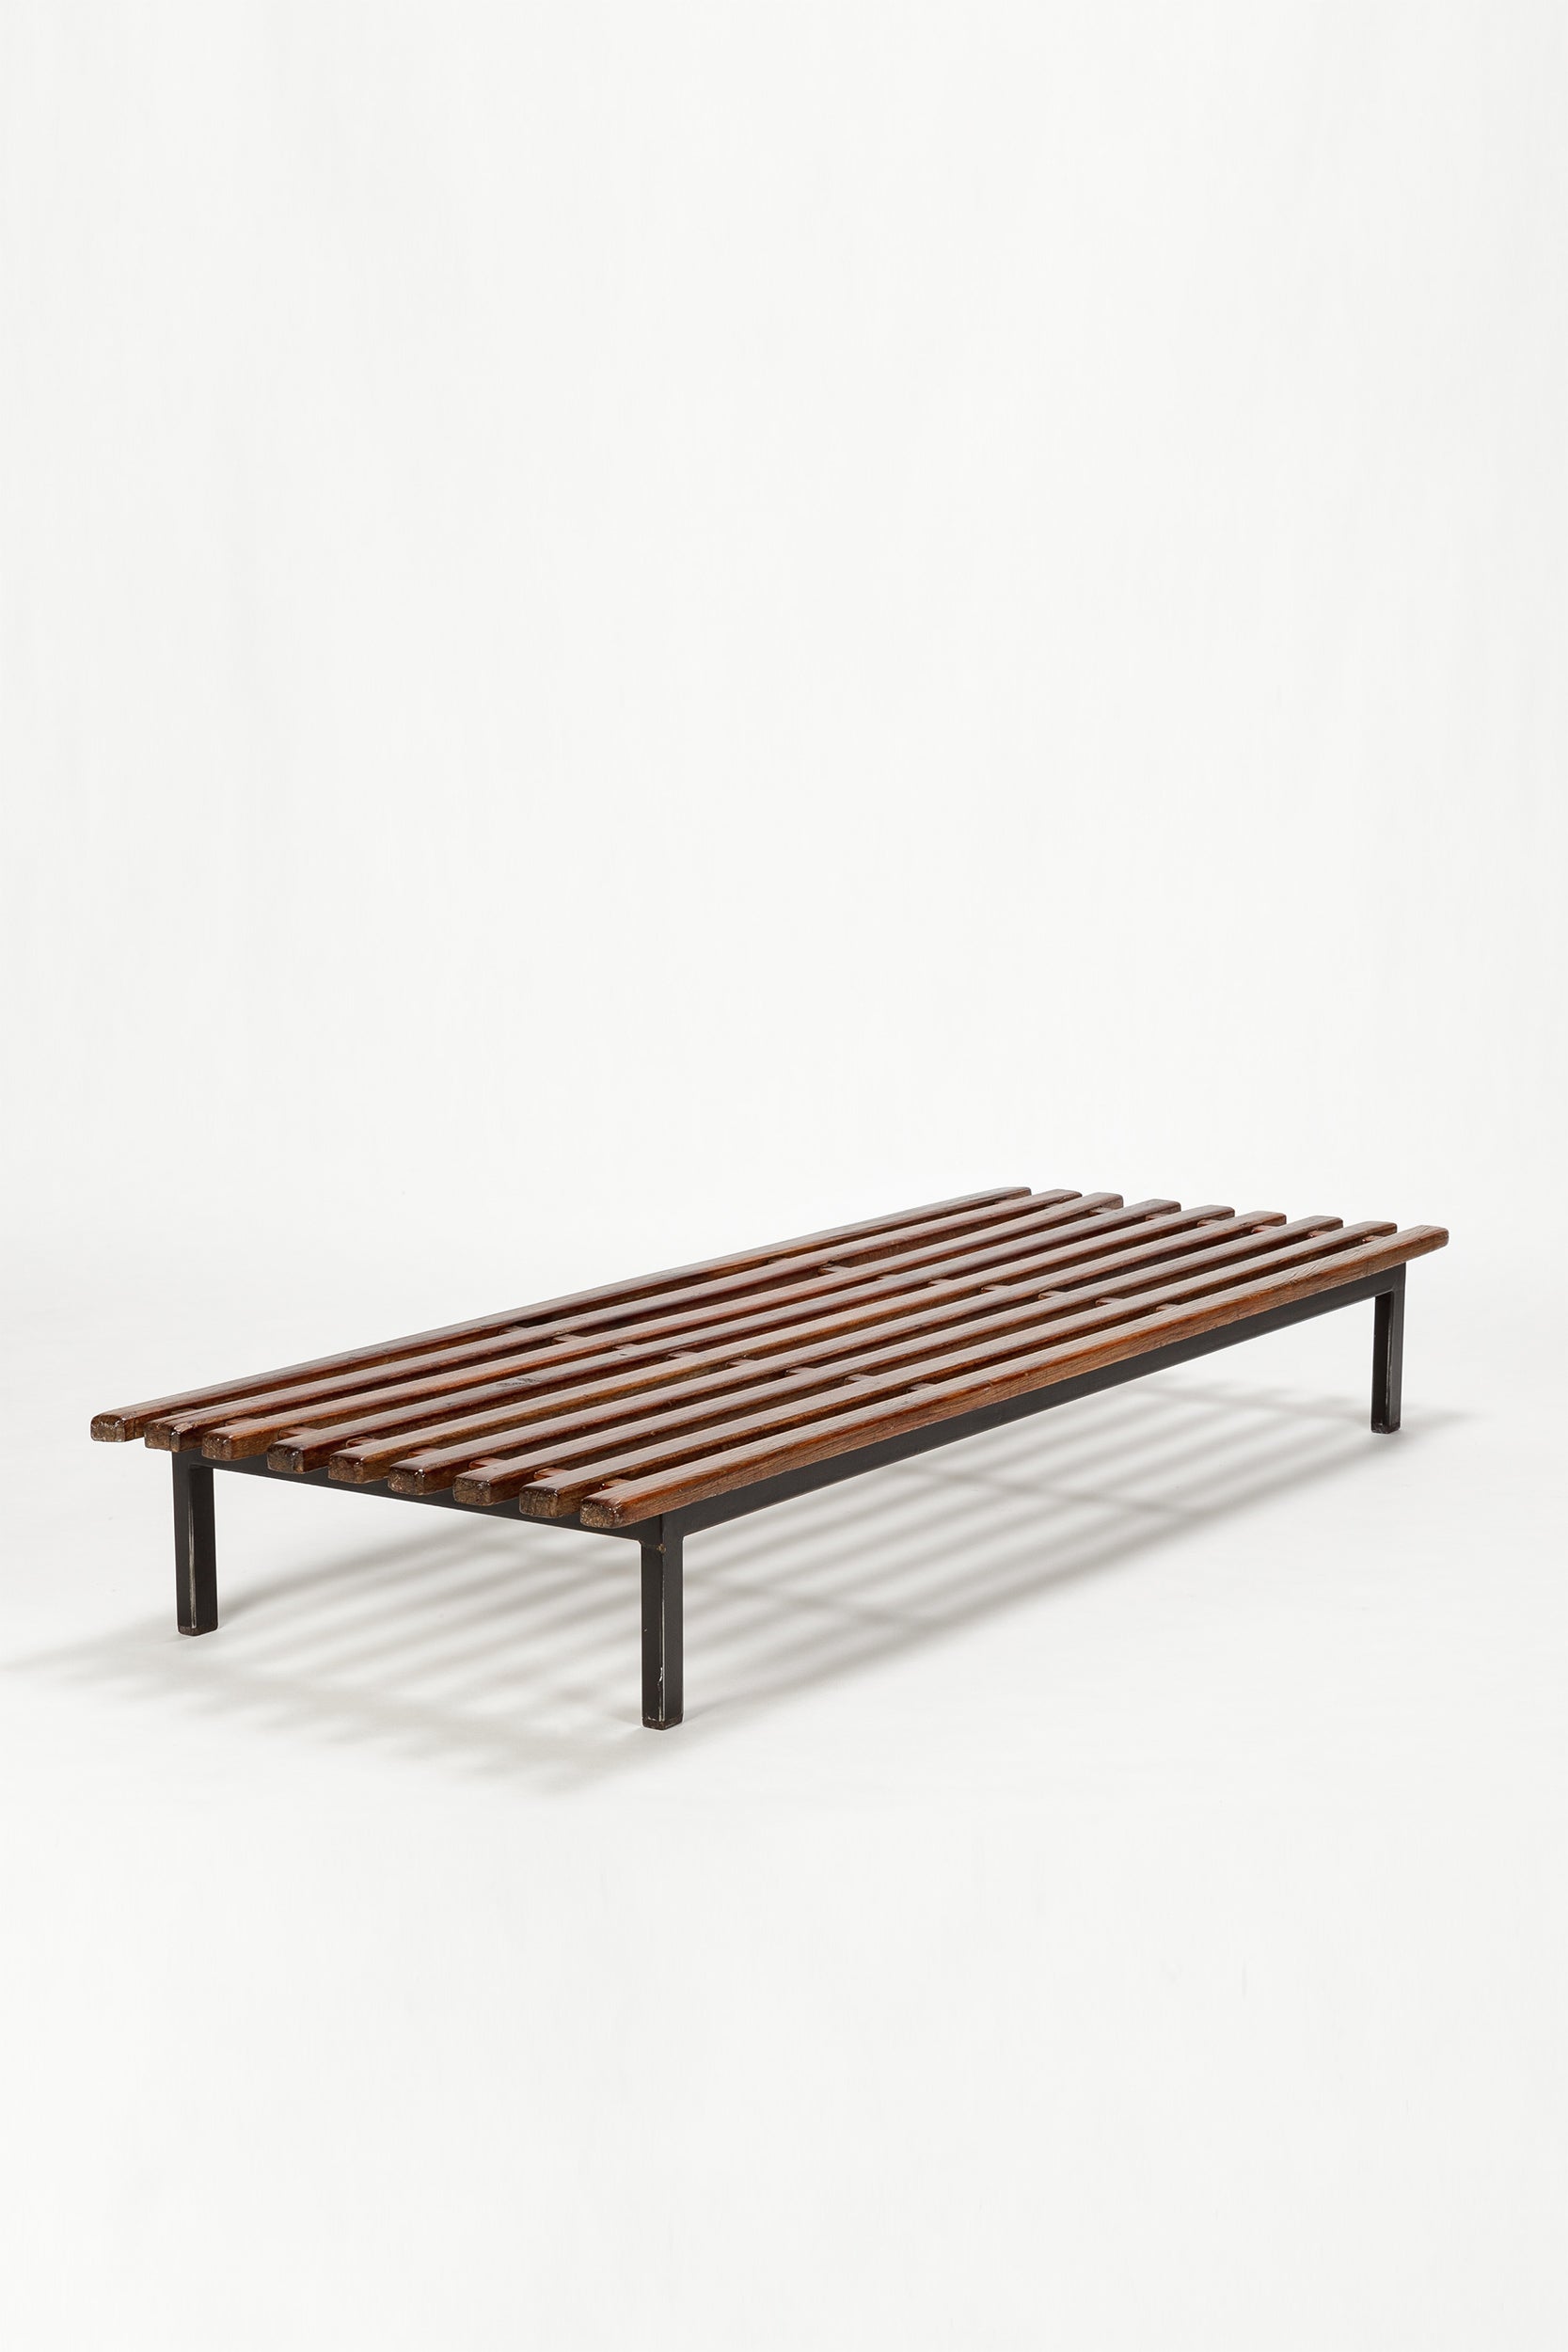 Charlotte Perriand, Cansado bench. 1958